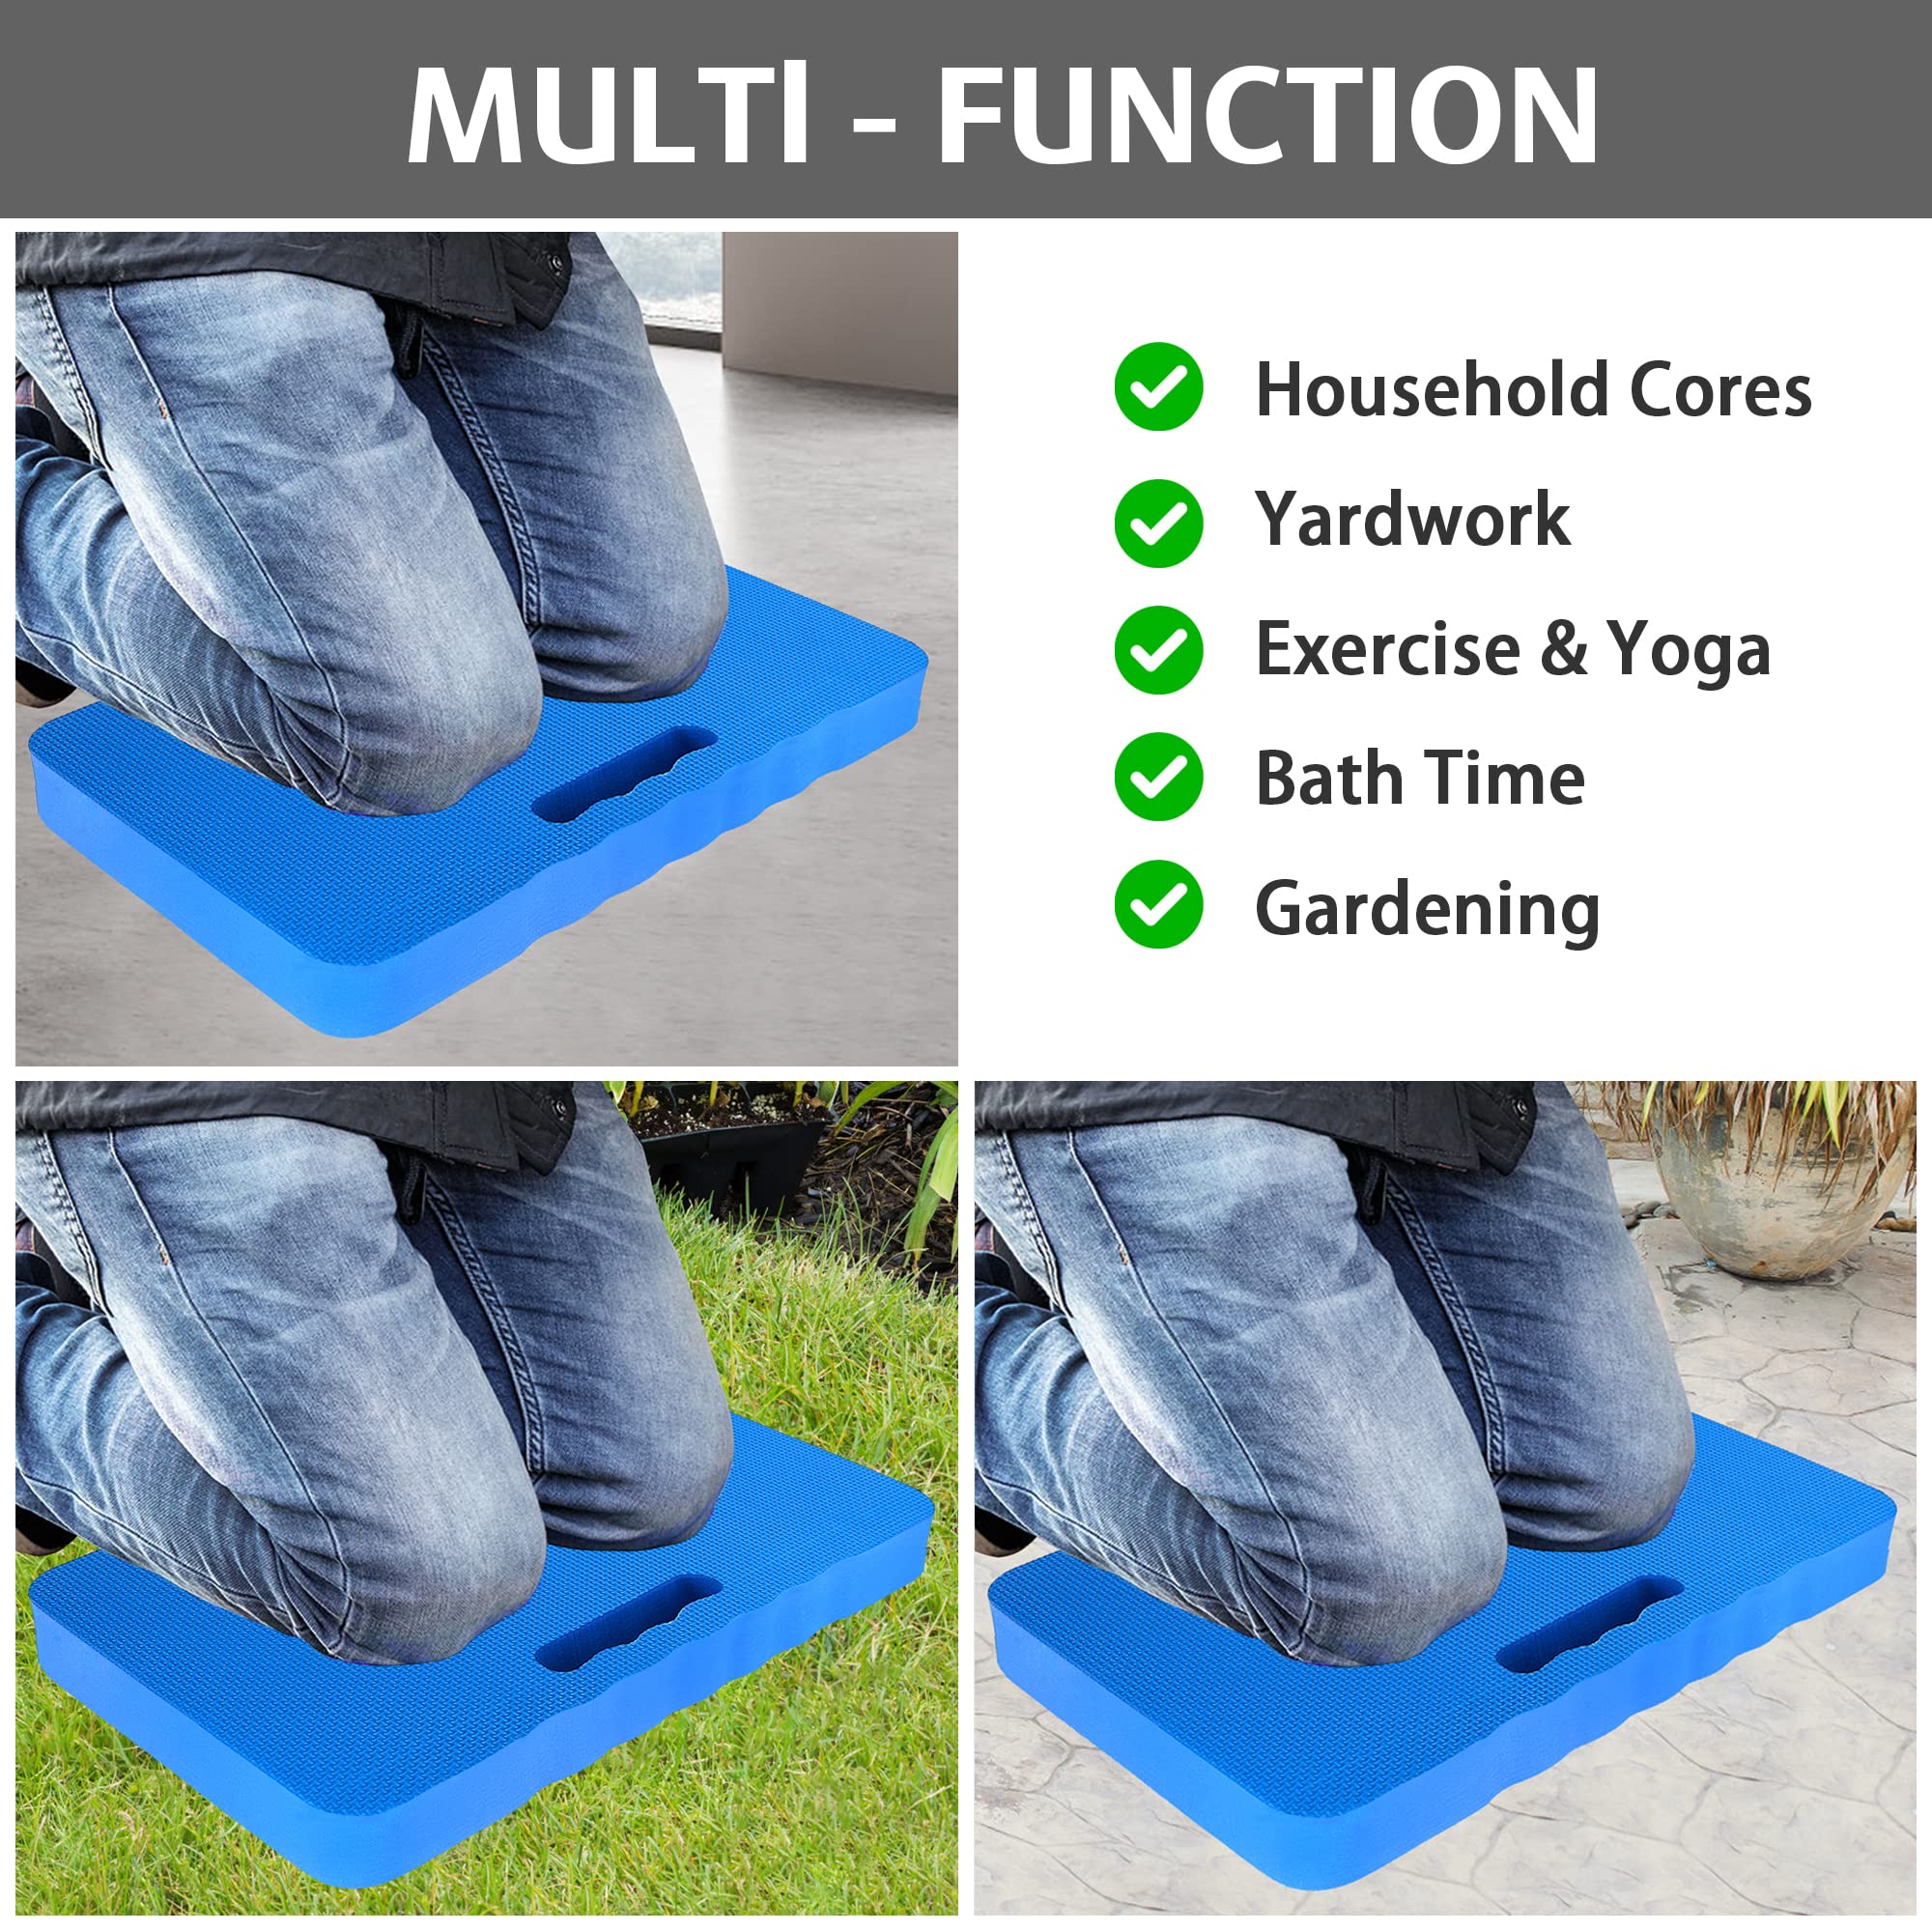 HOOPLE Extra Thick Kneeling Pad, Soft Foam Kneeling Cushion, Waterproof Knee Pads, Lightweight Knee Mat for Bathing, Workout Supplies, Exercise Yoga, Garden Work Gifts 15.7 x 11 Inches Blue